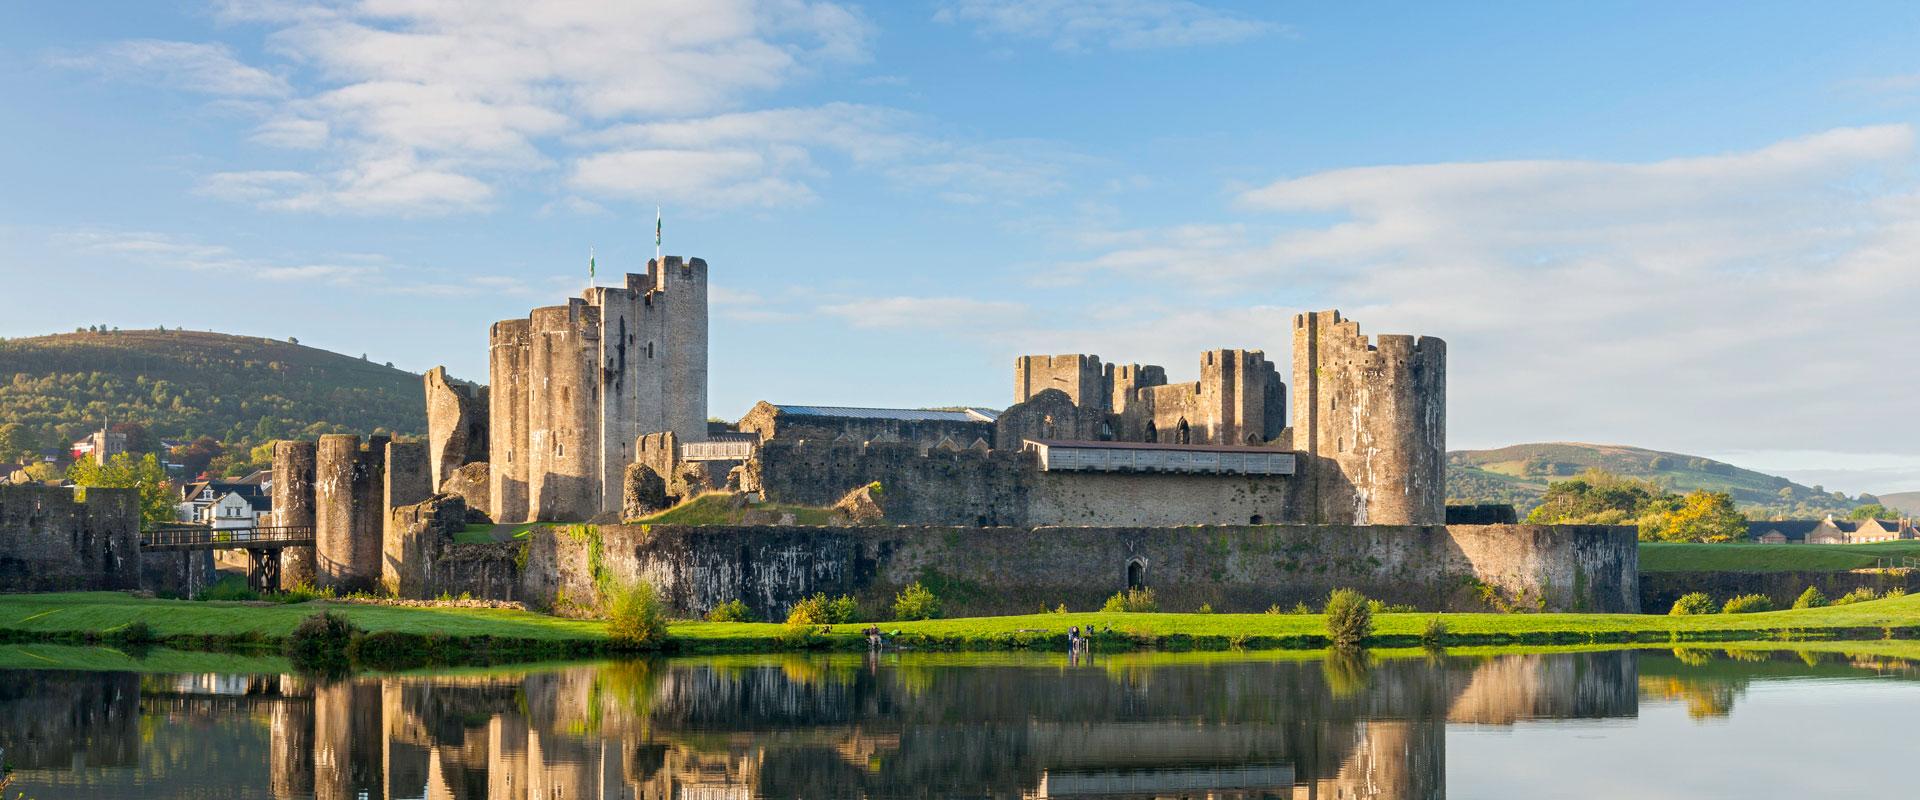 Caerphilly Castle exterior view from north lake